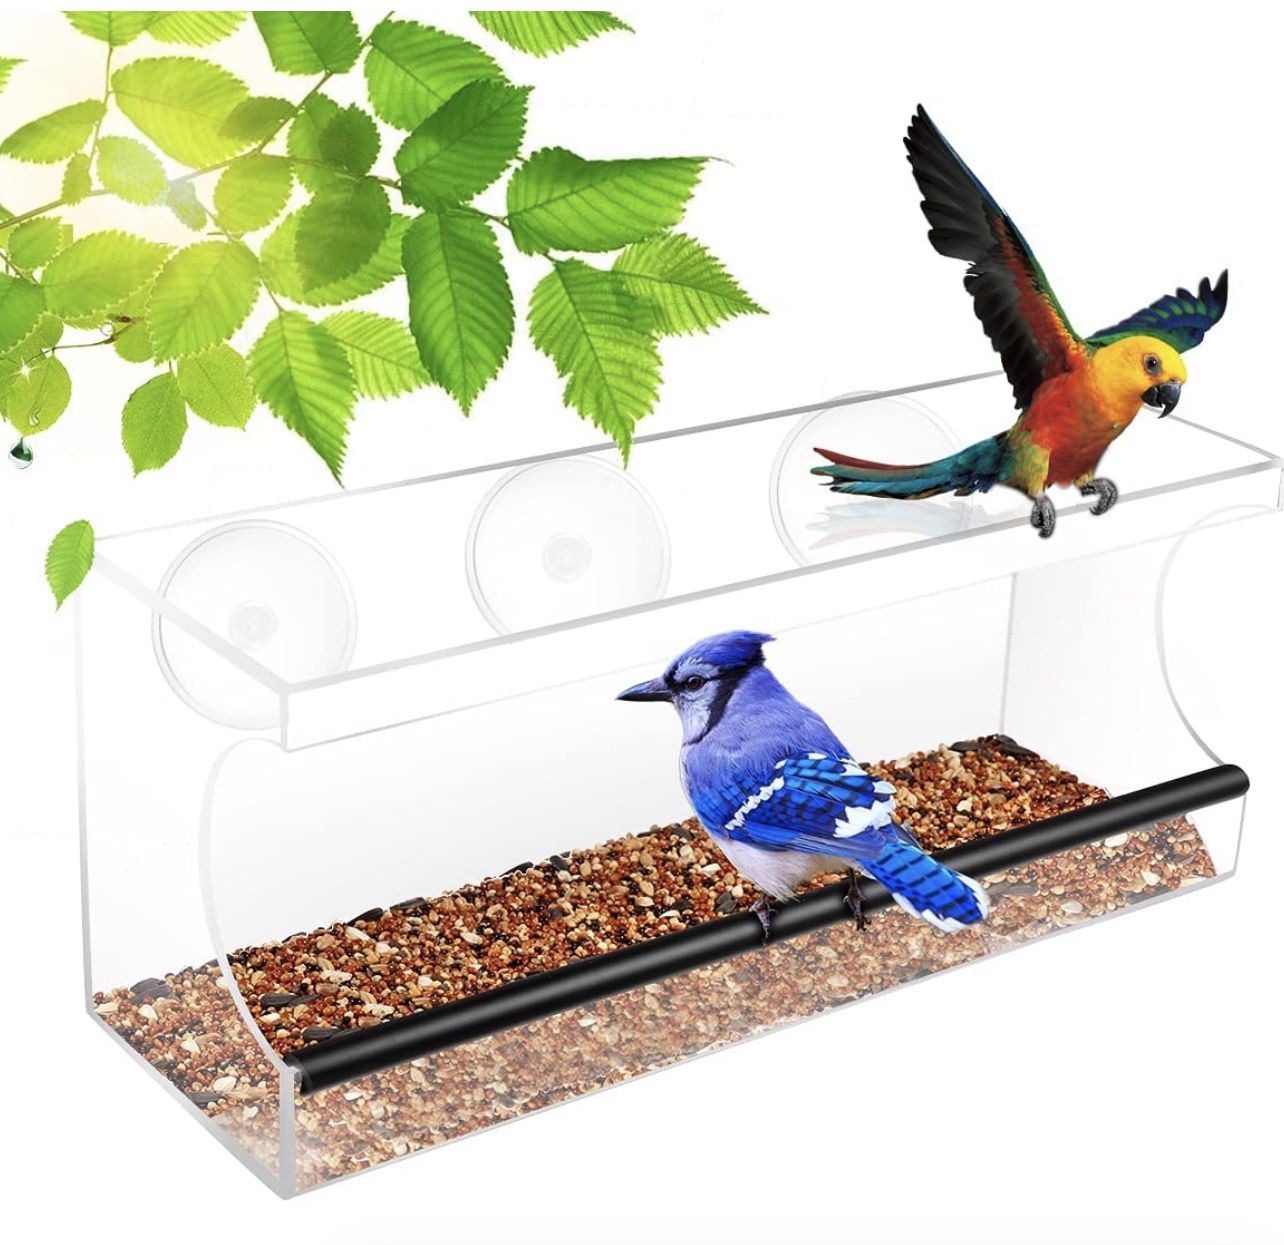 Window Bird Feeders, Acrylic Bird Feeders for Outside with Strong Suction Cups, Drain Holes and Removable Tray